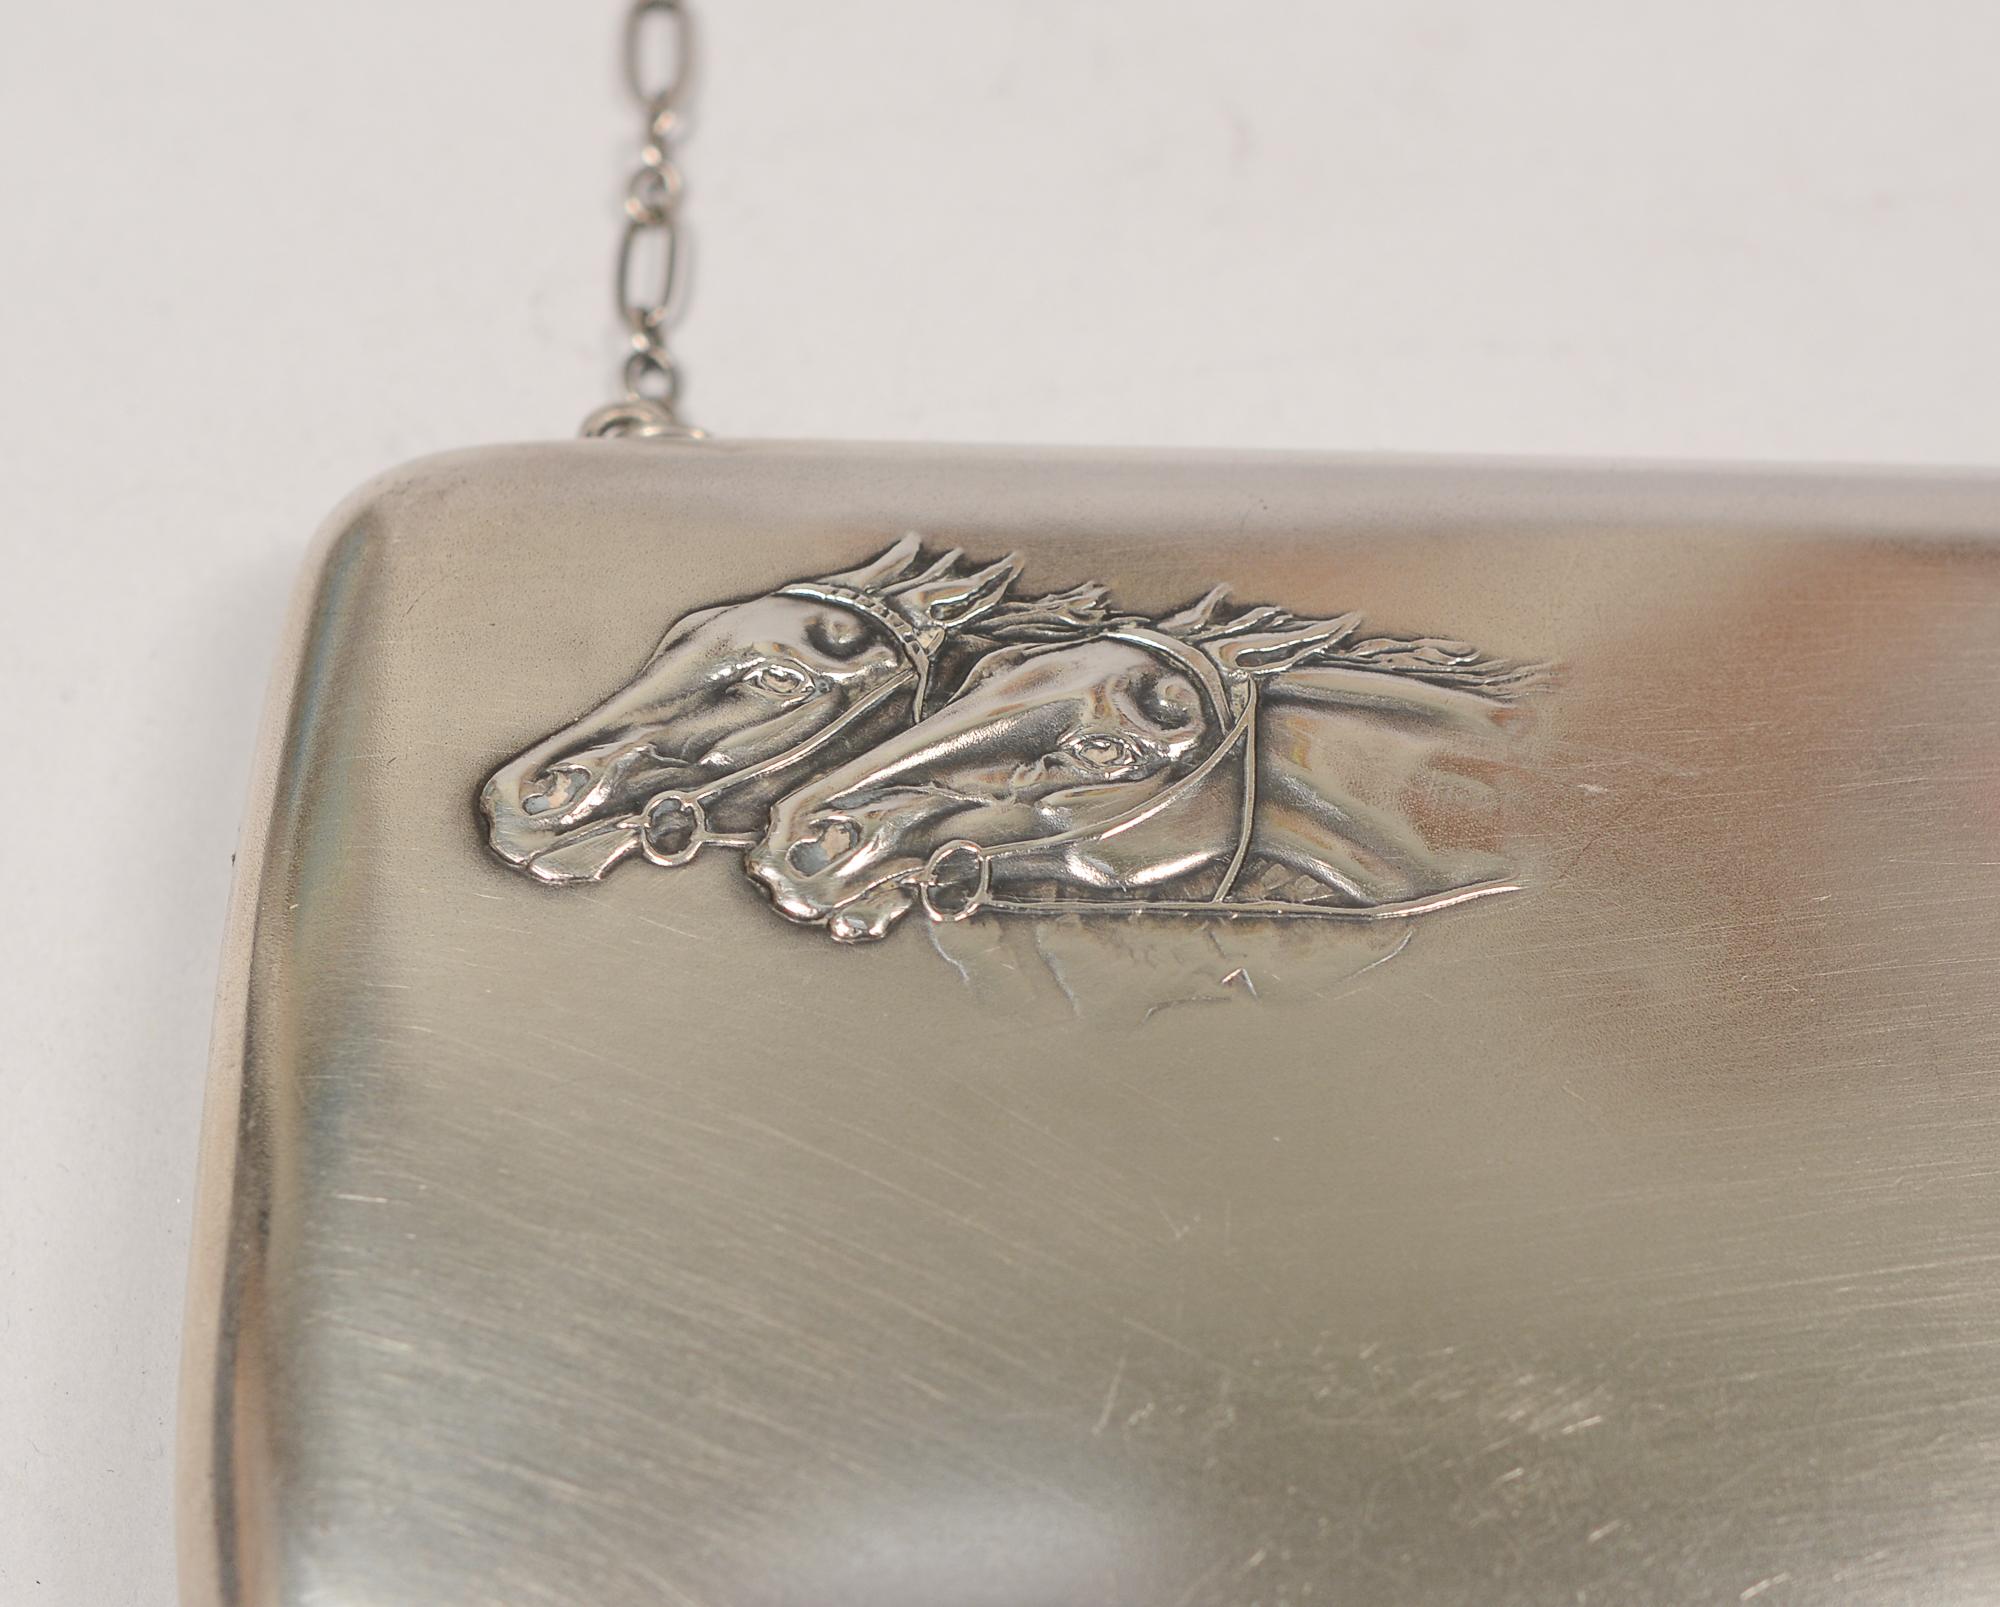 Russian silver clutch or evening purse. This has repousse horse heads with outstanding detail in the left corner. The clutch is .875 fine silver. There is a glass cabochon for the clasp. This was made by the 2nd Artel in Moscow about 1912 to 1916.